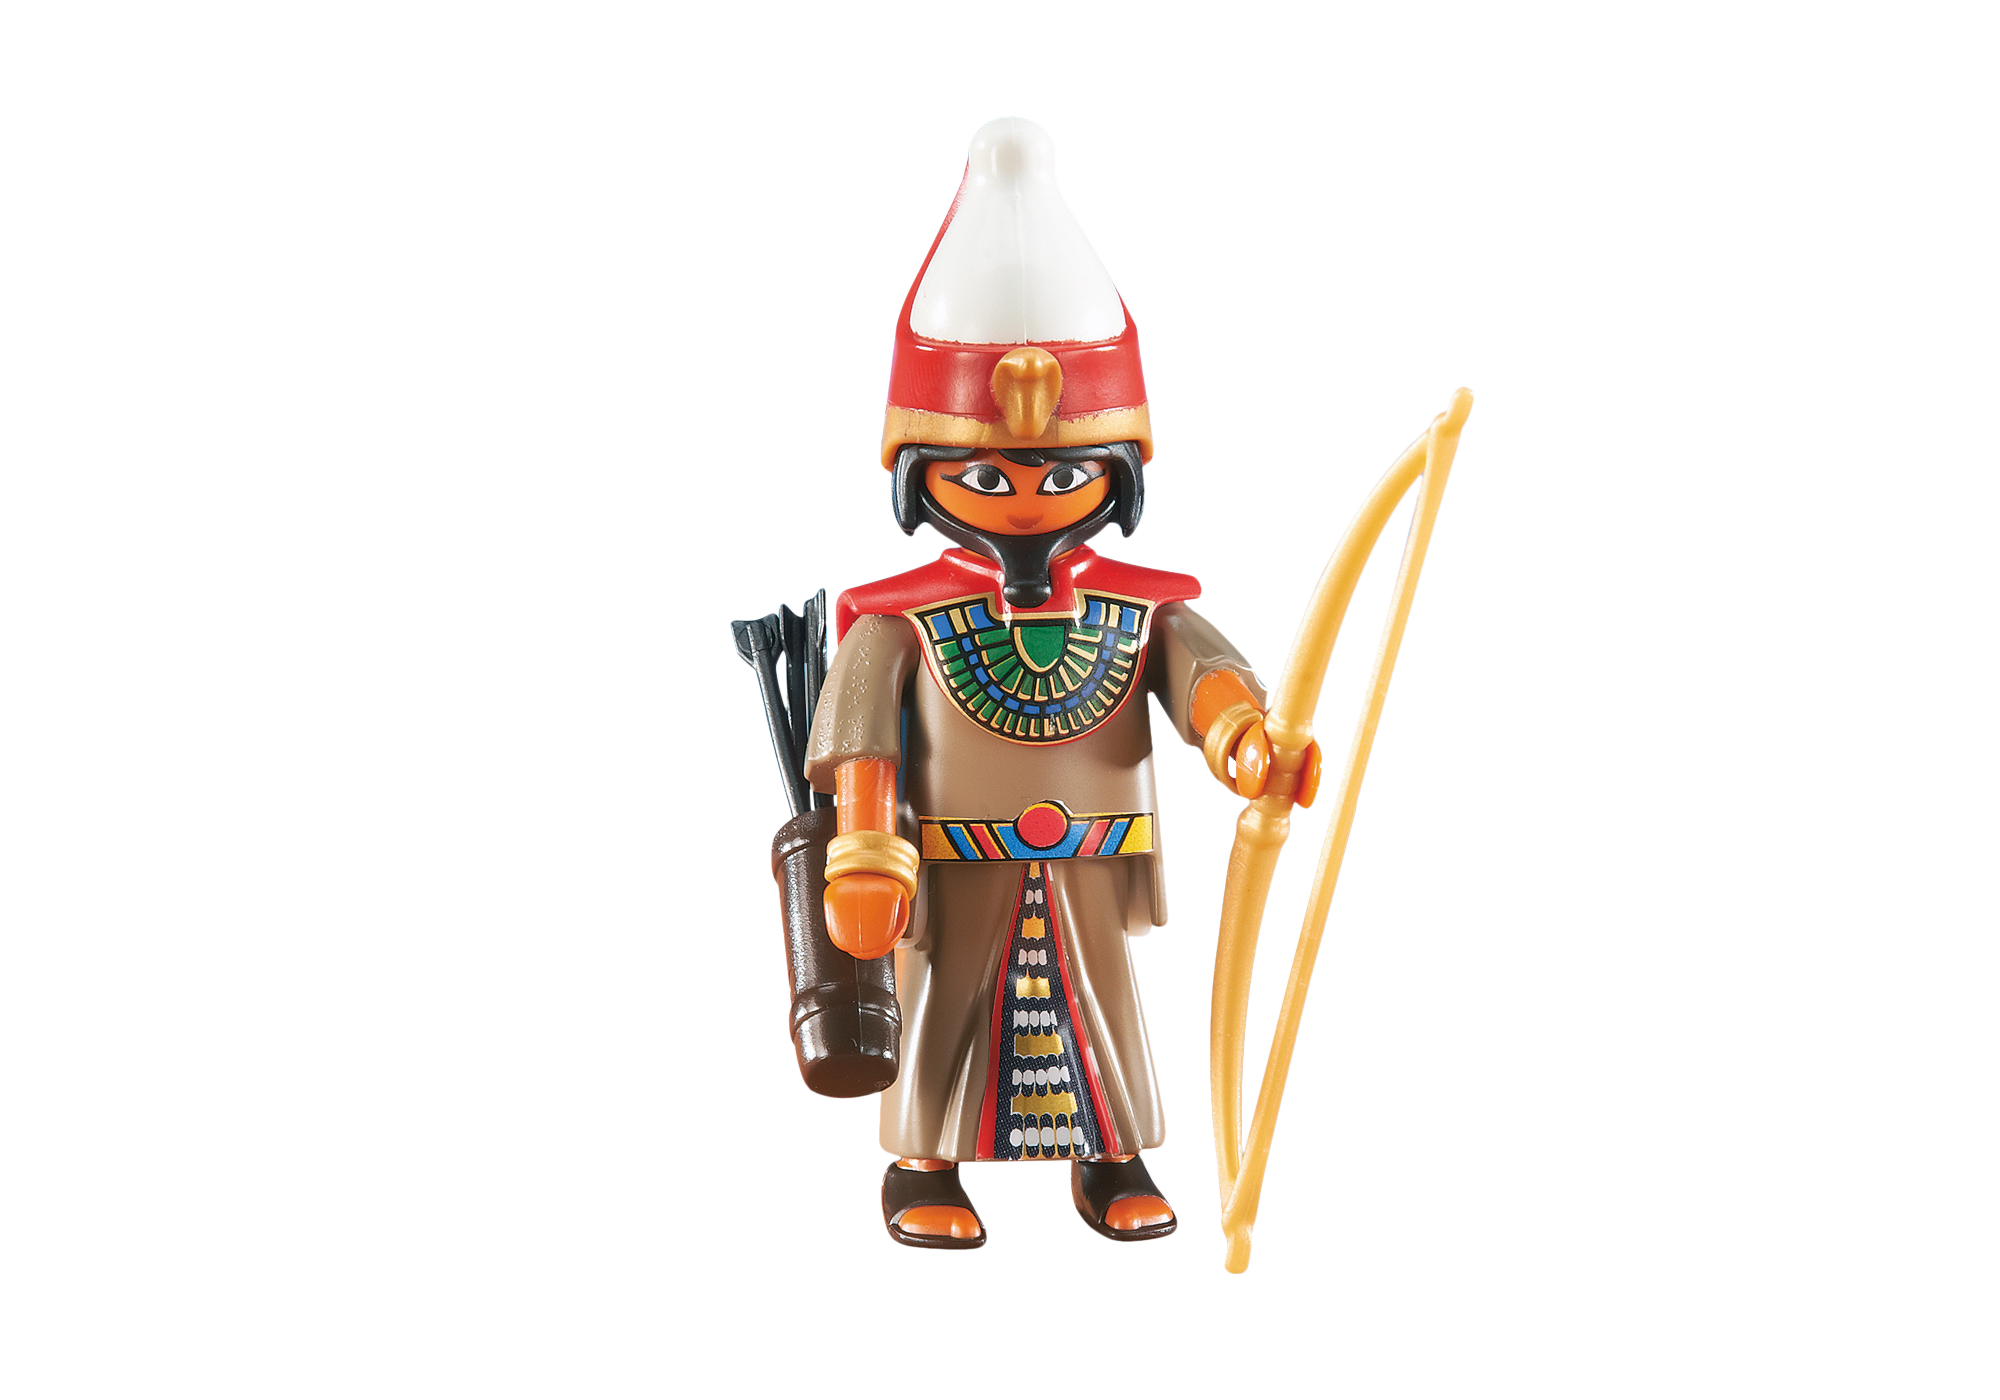 leader-of-the-egyptian-soldiers-6489-playmobil